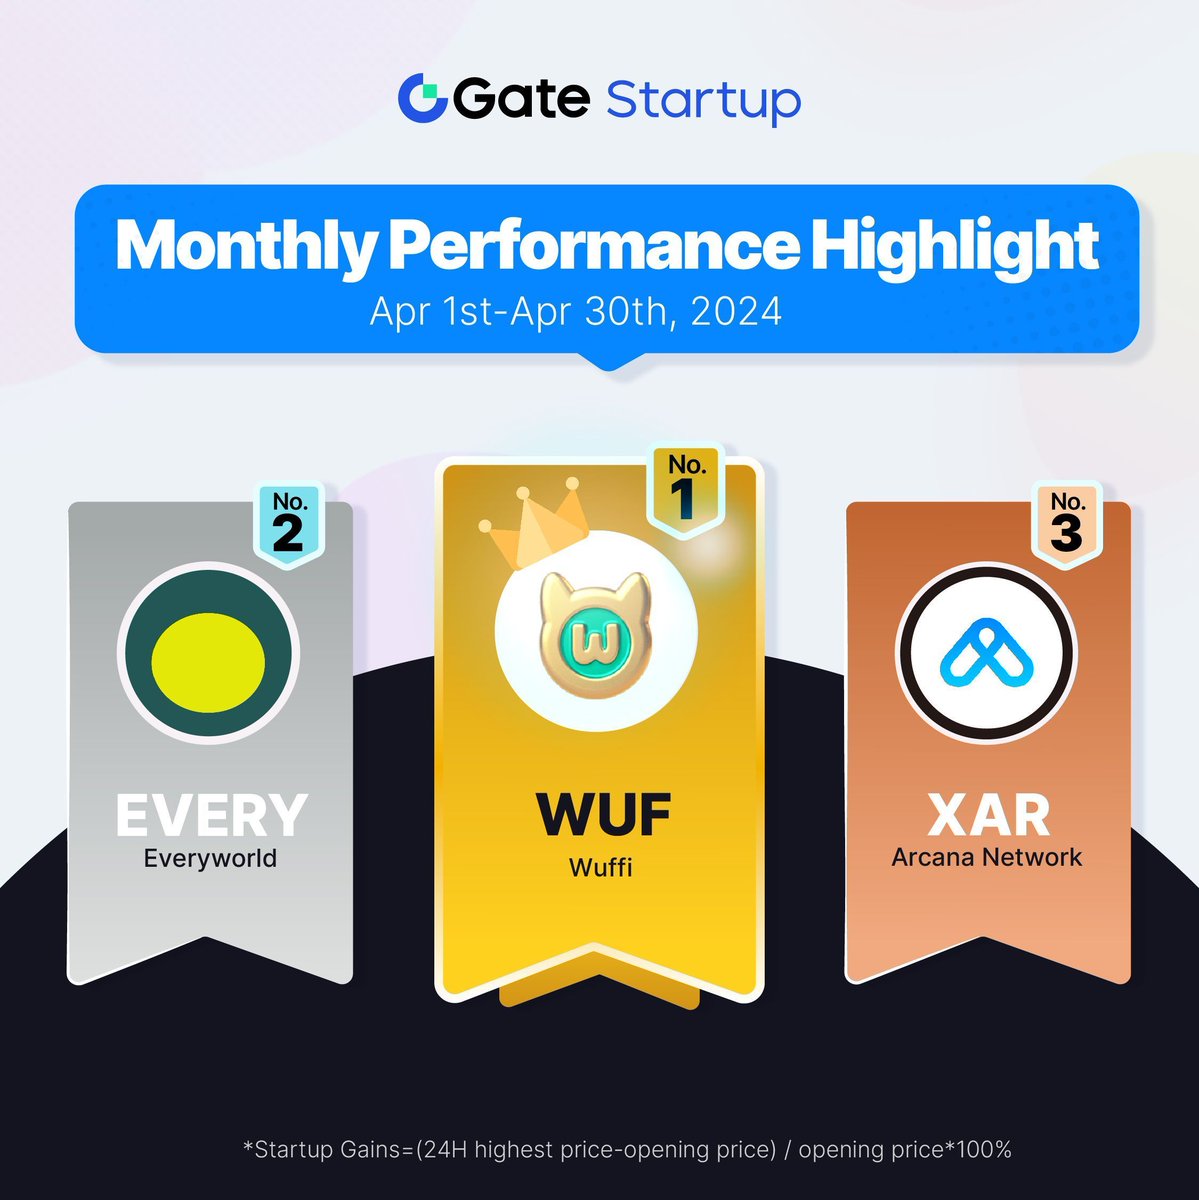 📈 Something highlighted for #GateioStartup in April: $WUF @WUFFI_Inu $EVERY @JoinEveryworld $XAR @ArcanaNetwork 👀 Which one are you eyeing on?